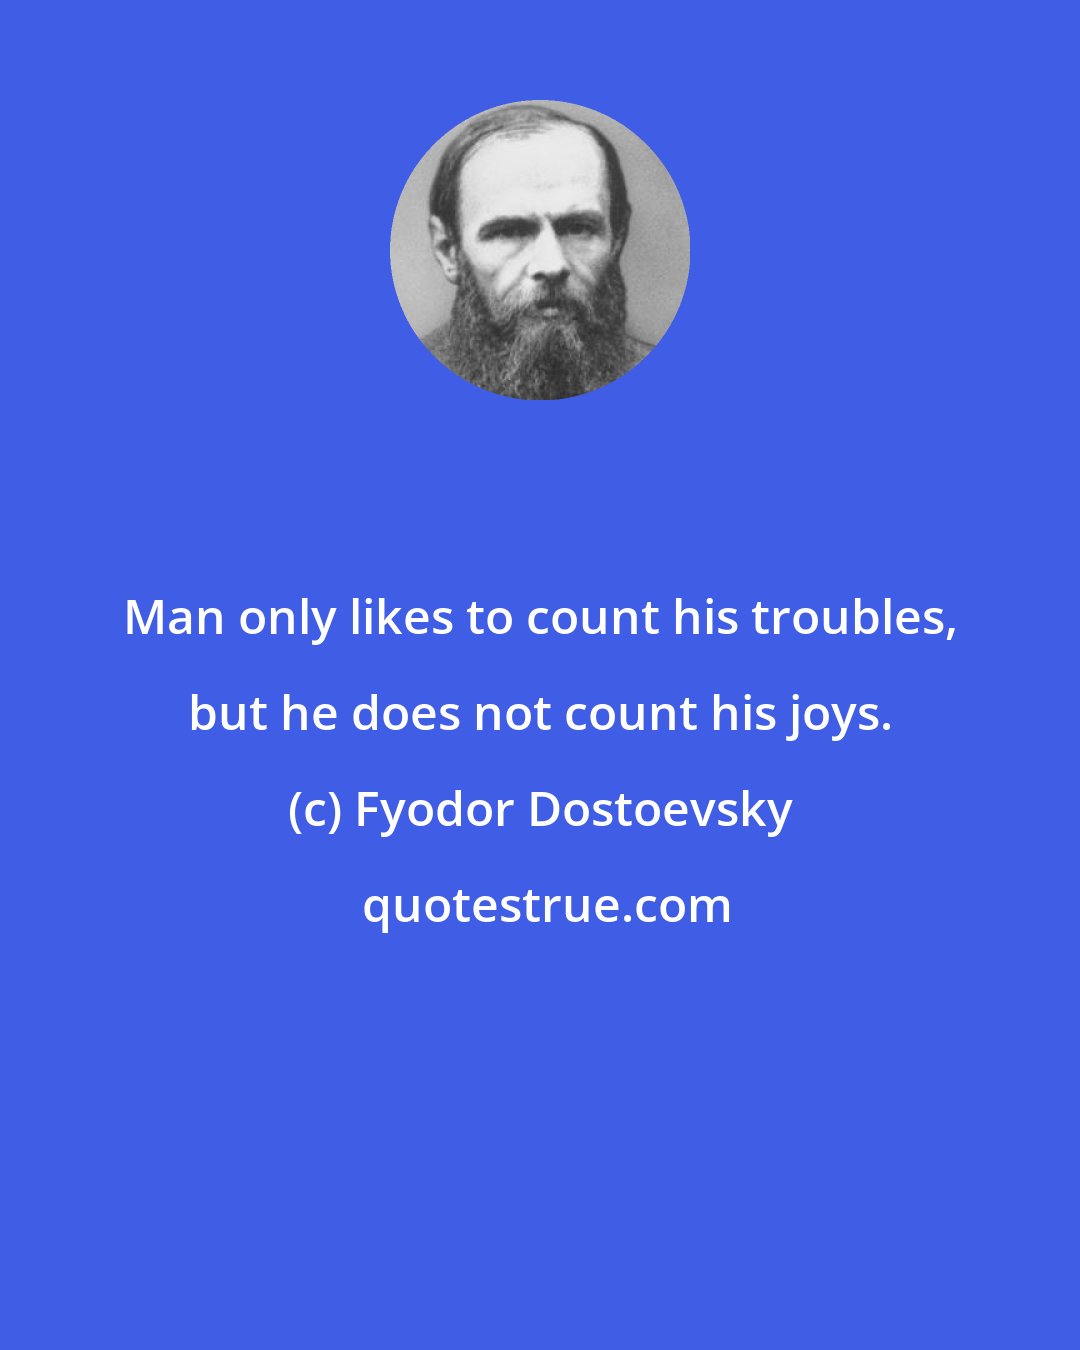 Fyodor Dostoevsky: Man only likes to count his troubles, but he does not count his joys.